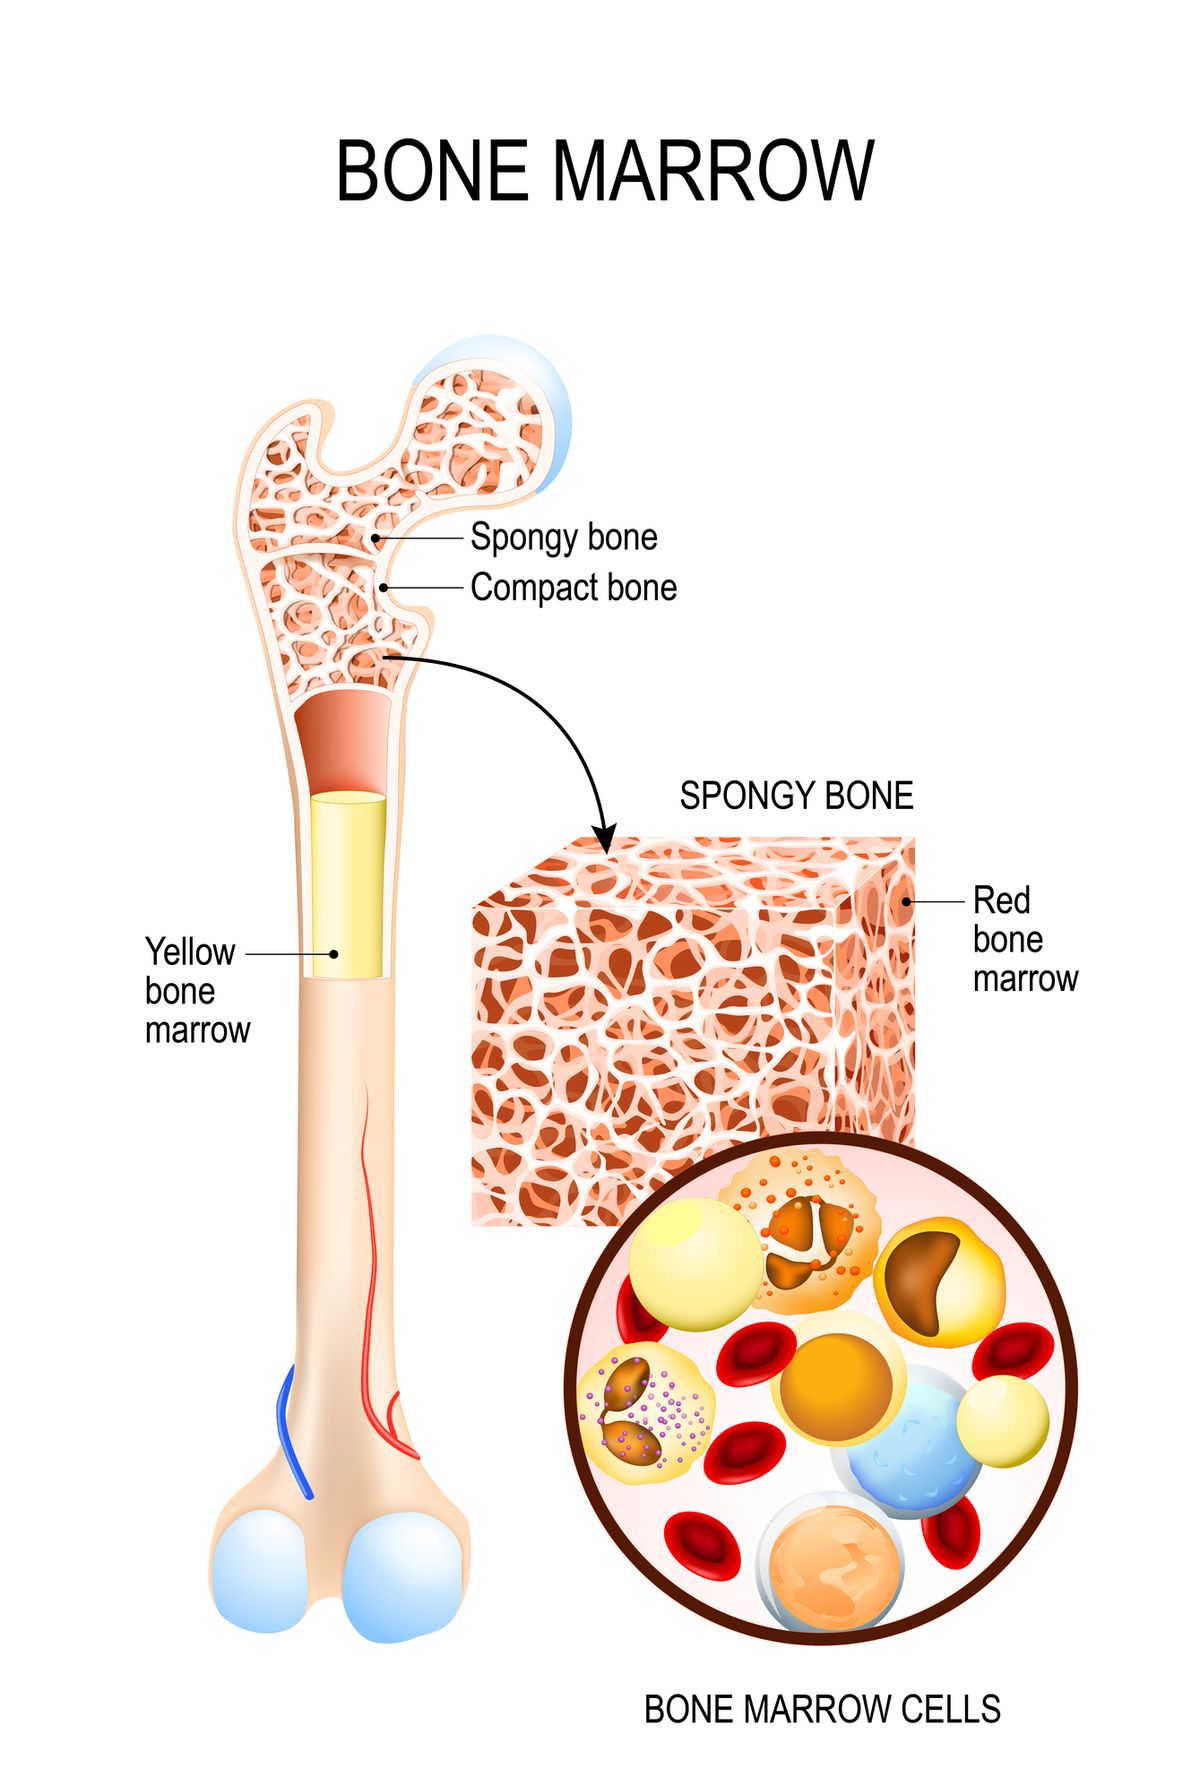 Bone Marrow: The Source of Blood Cells